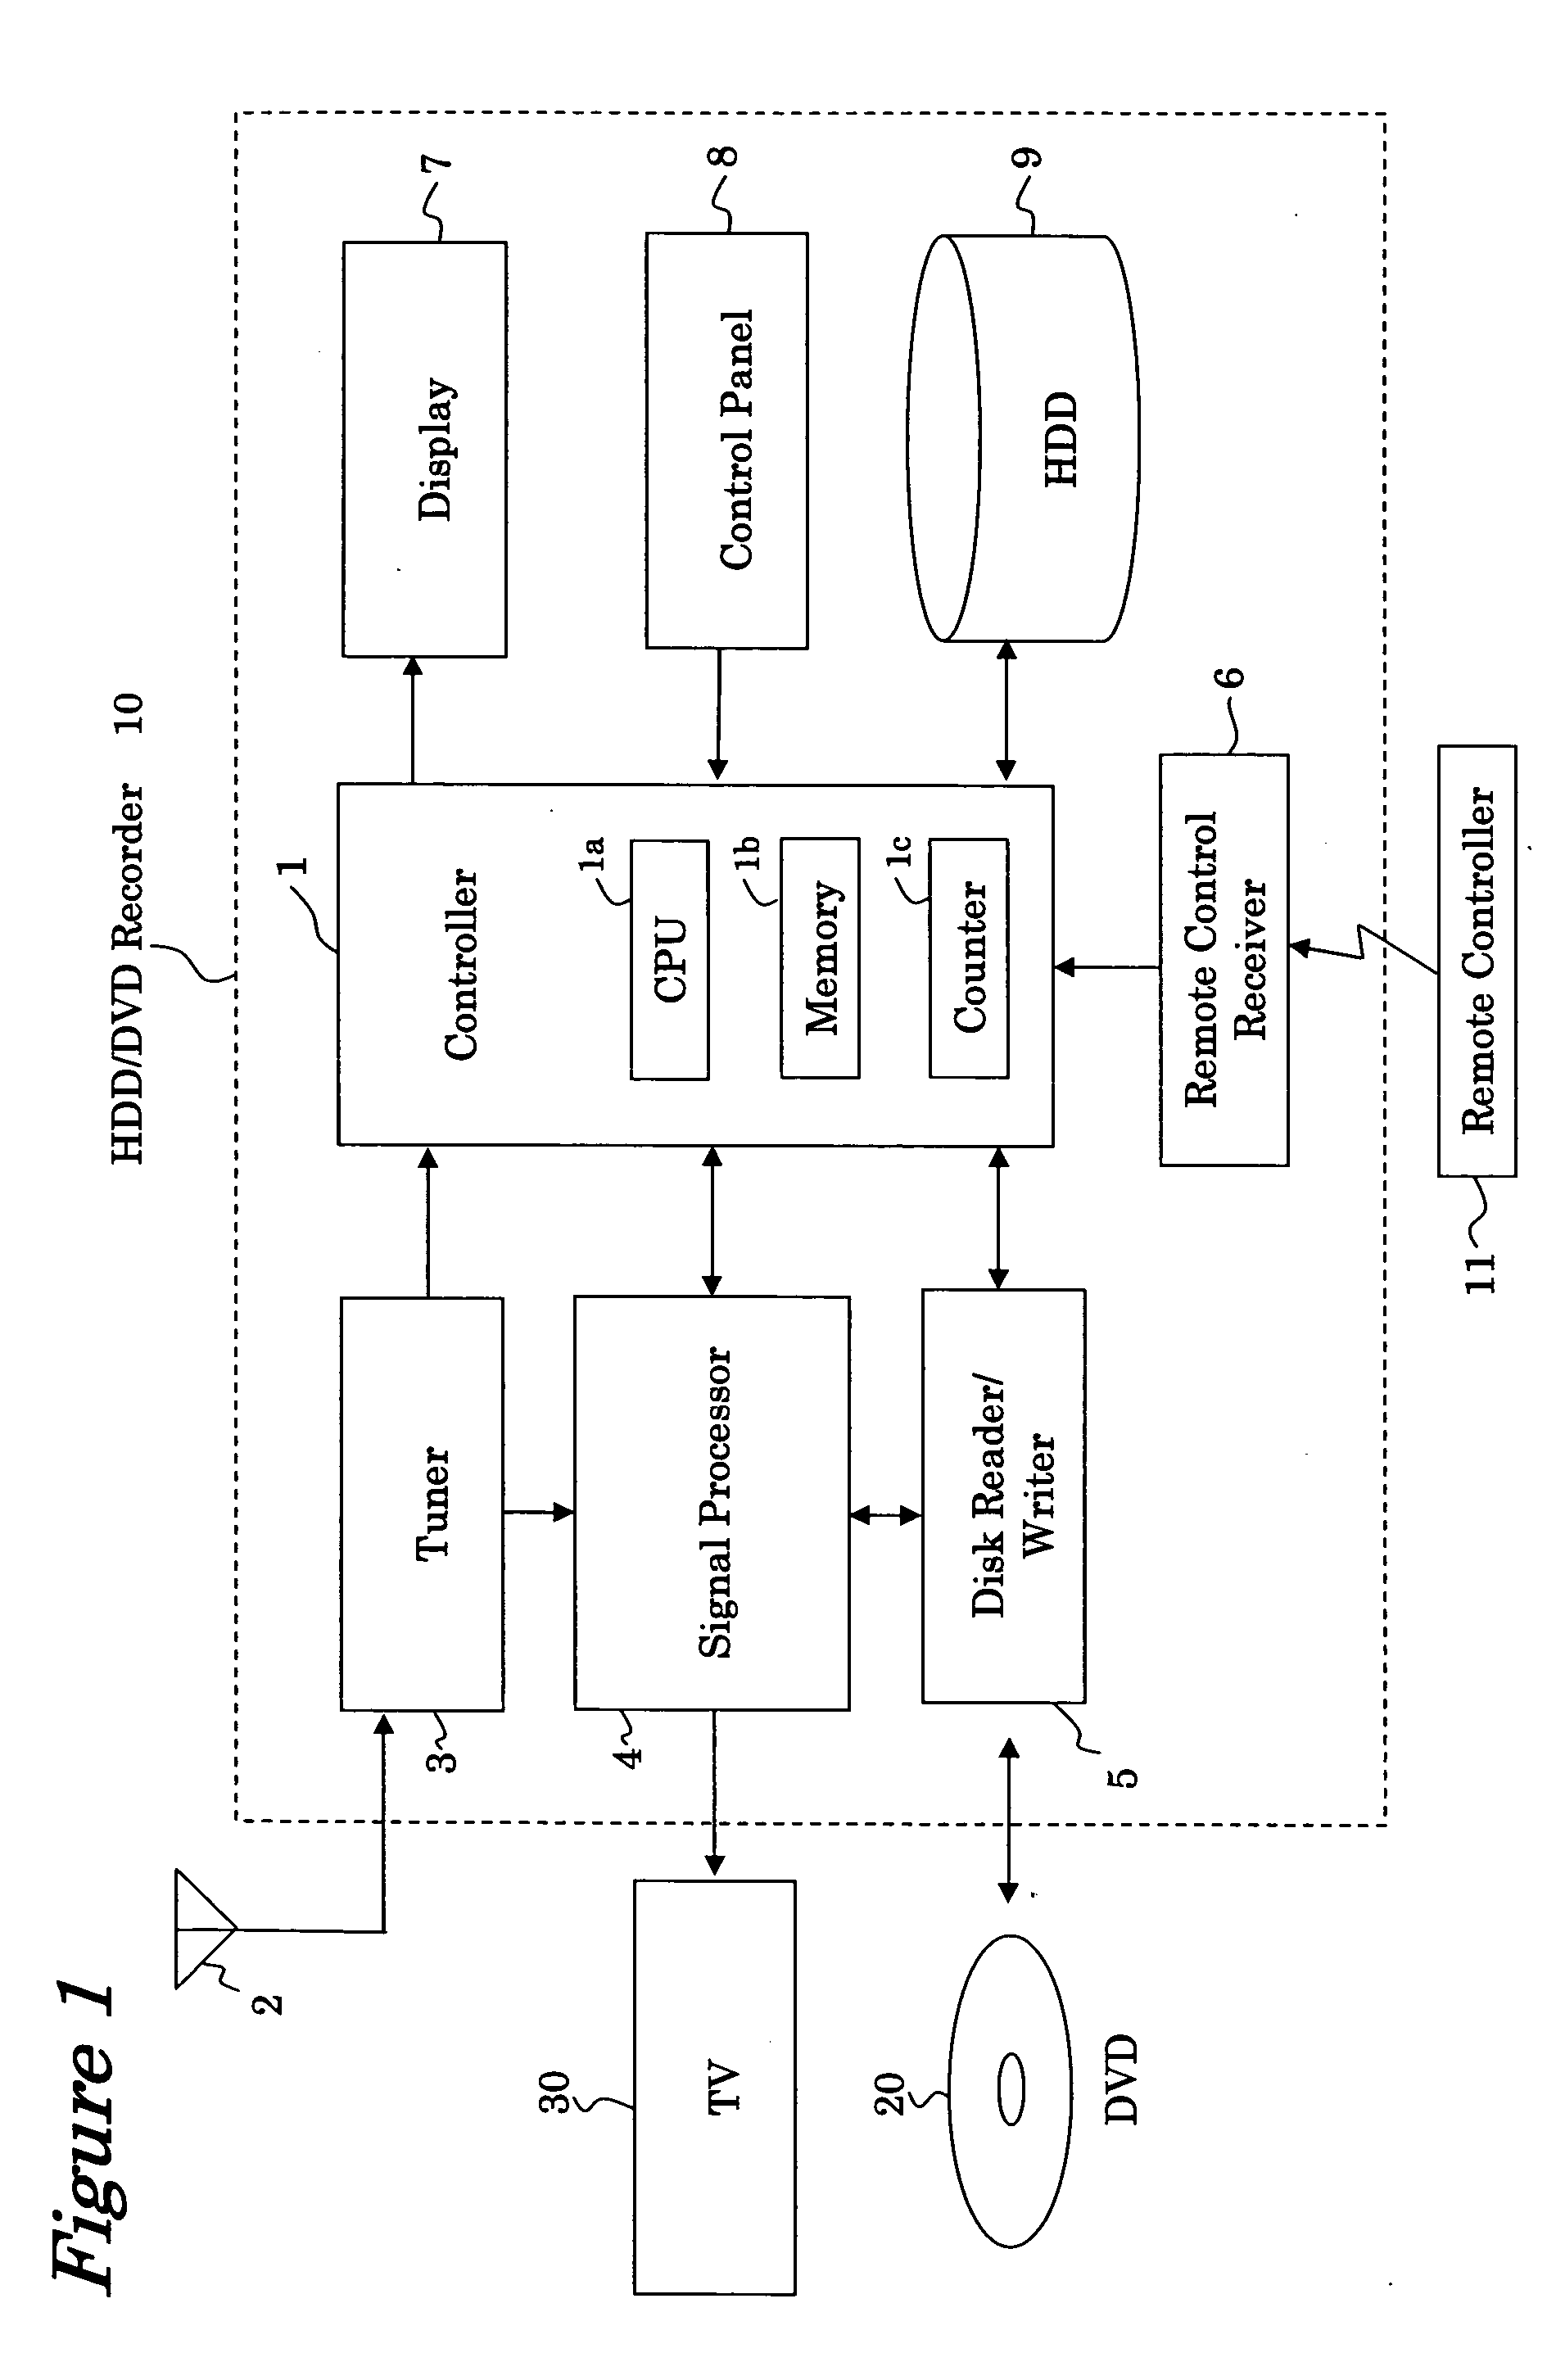 Video recording and playing apparatus